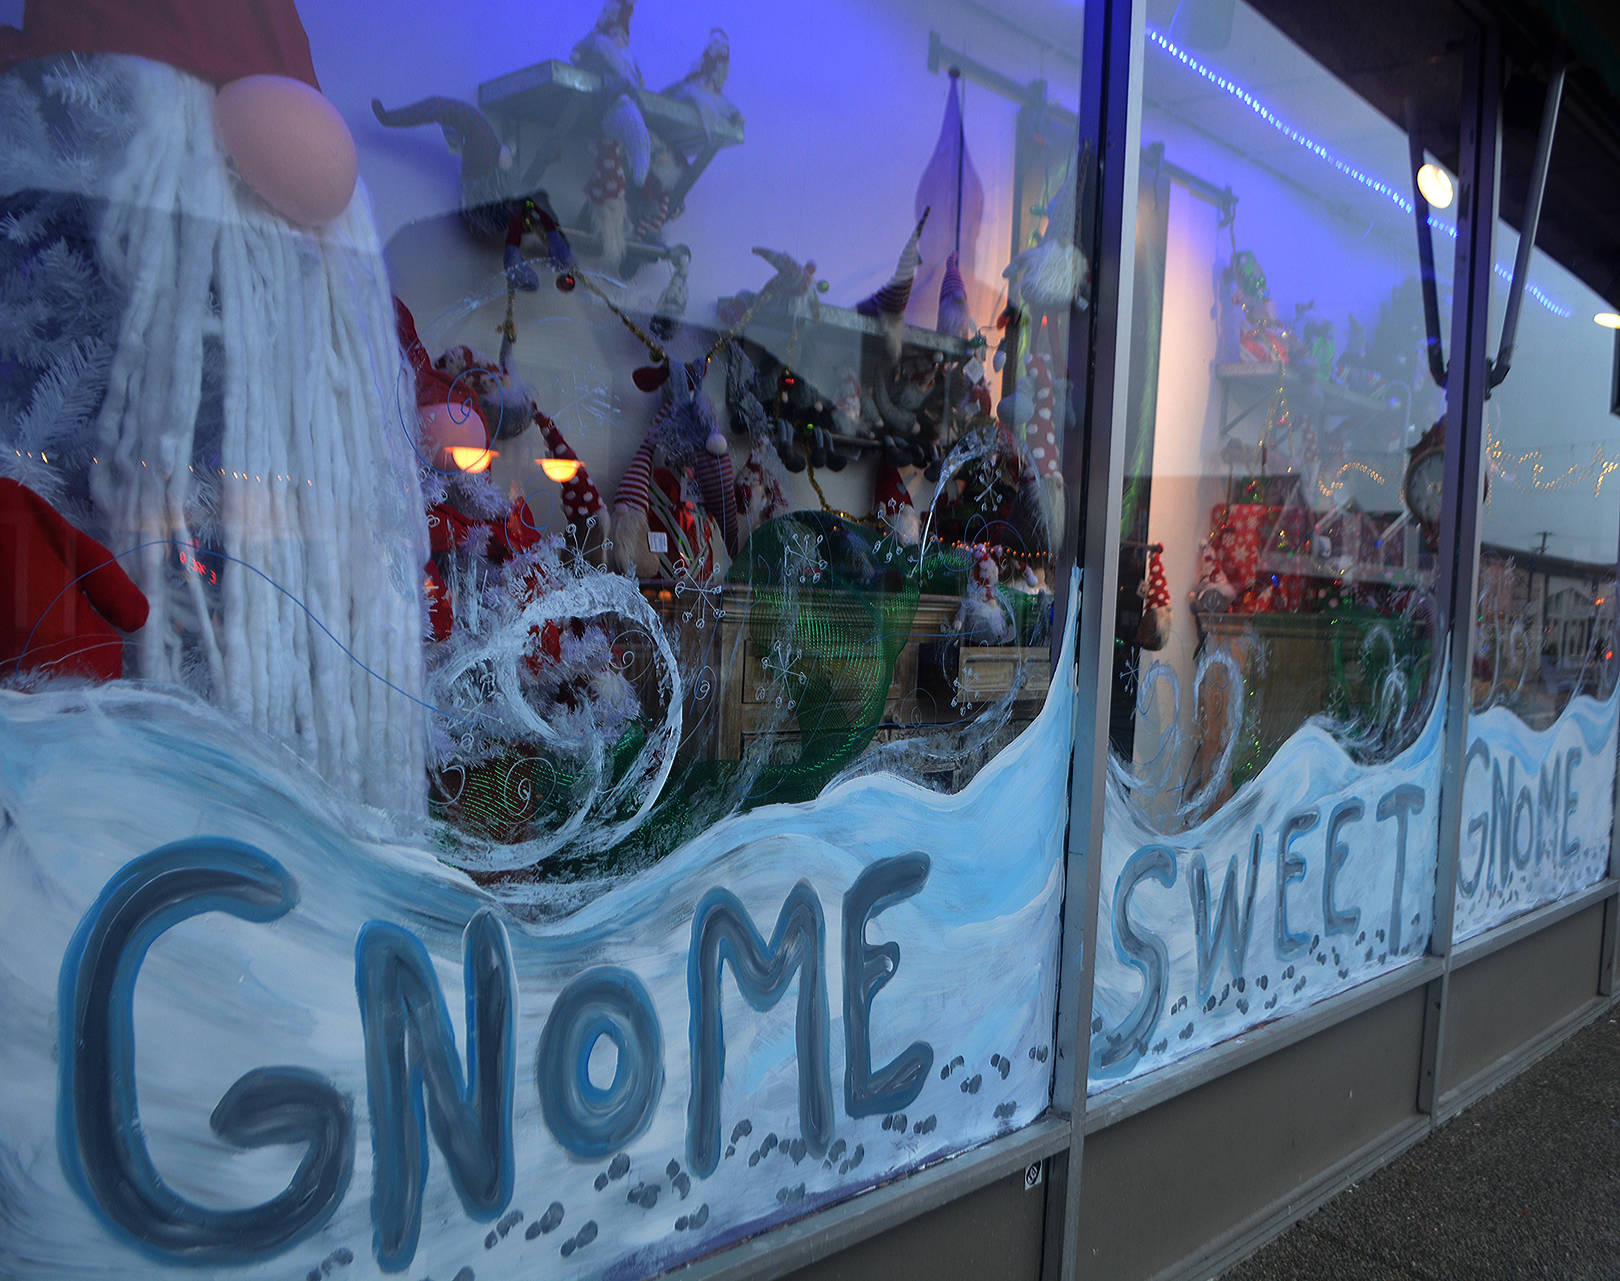 Christmas storefronts are filled with holiday displays.